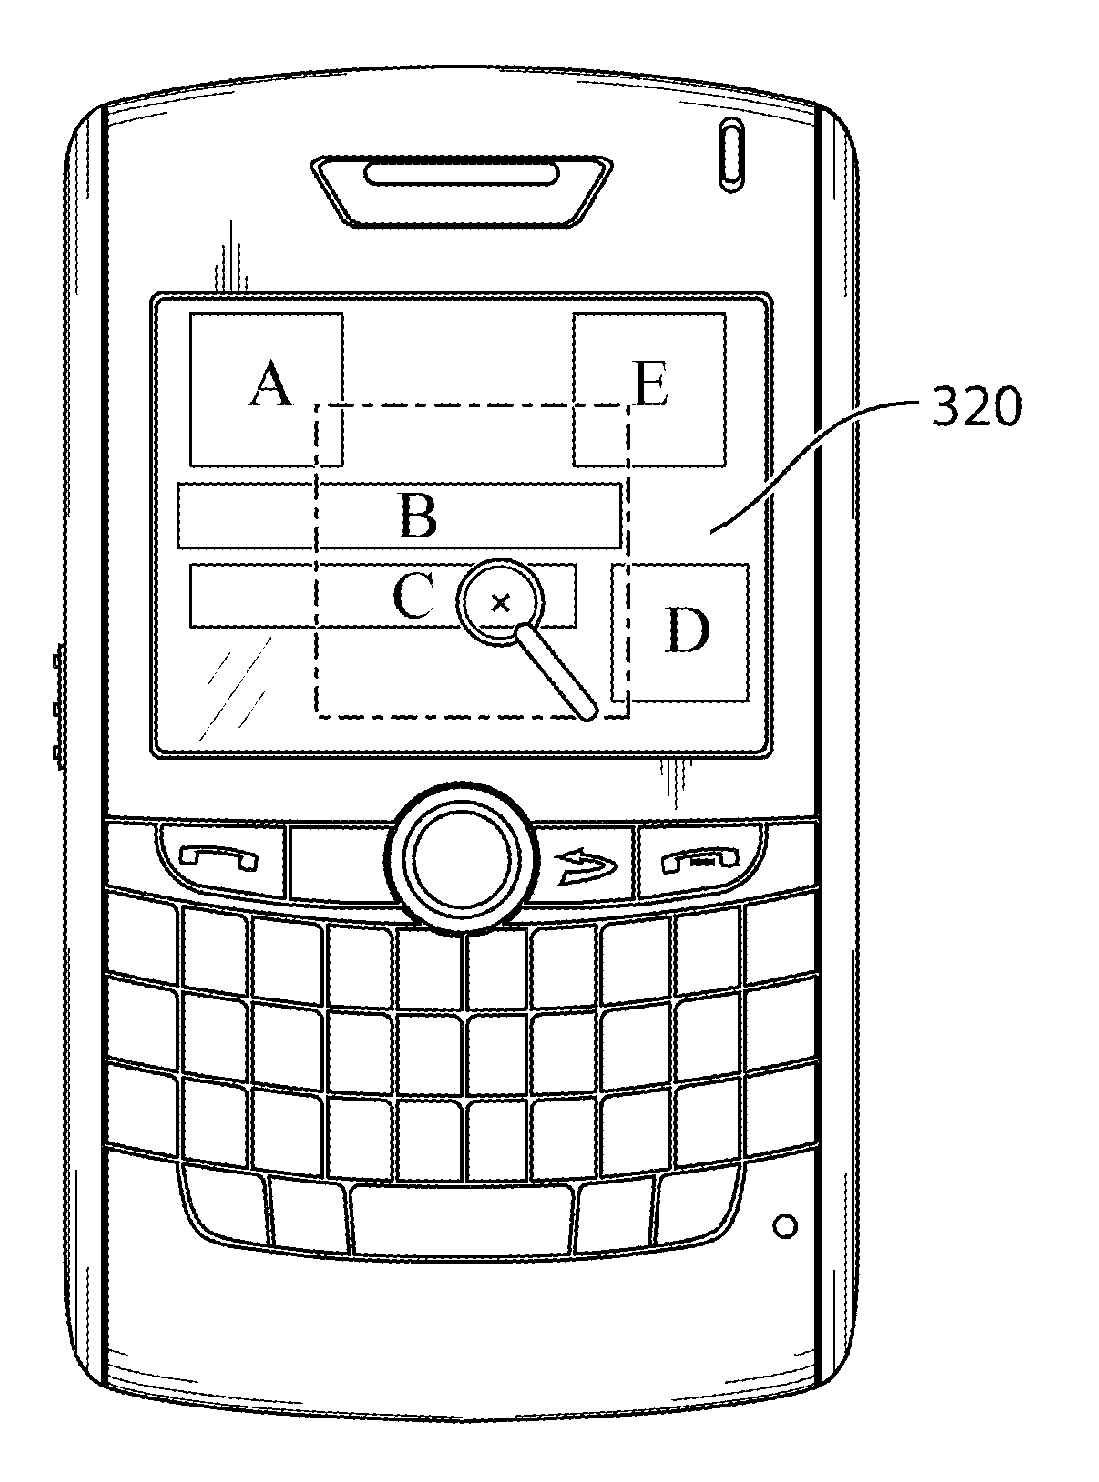 Method and apparatus for providing zoom functionality in a portable device display